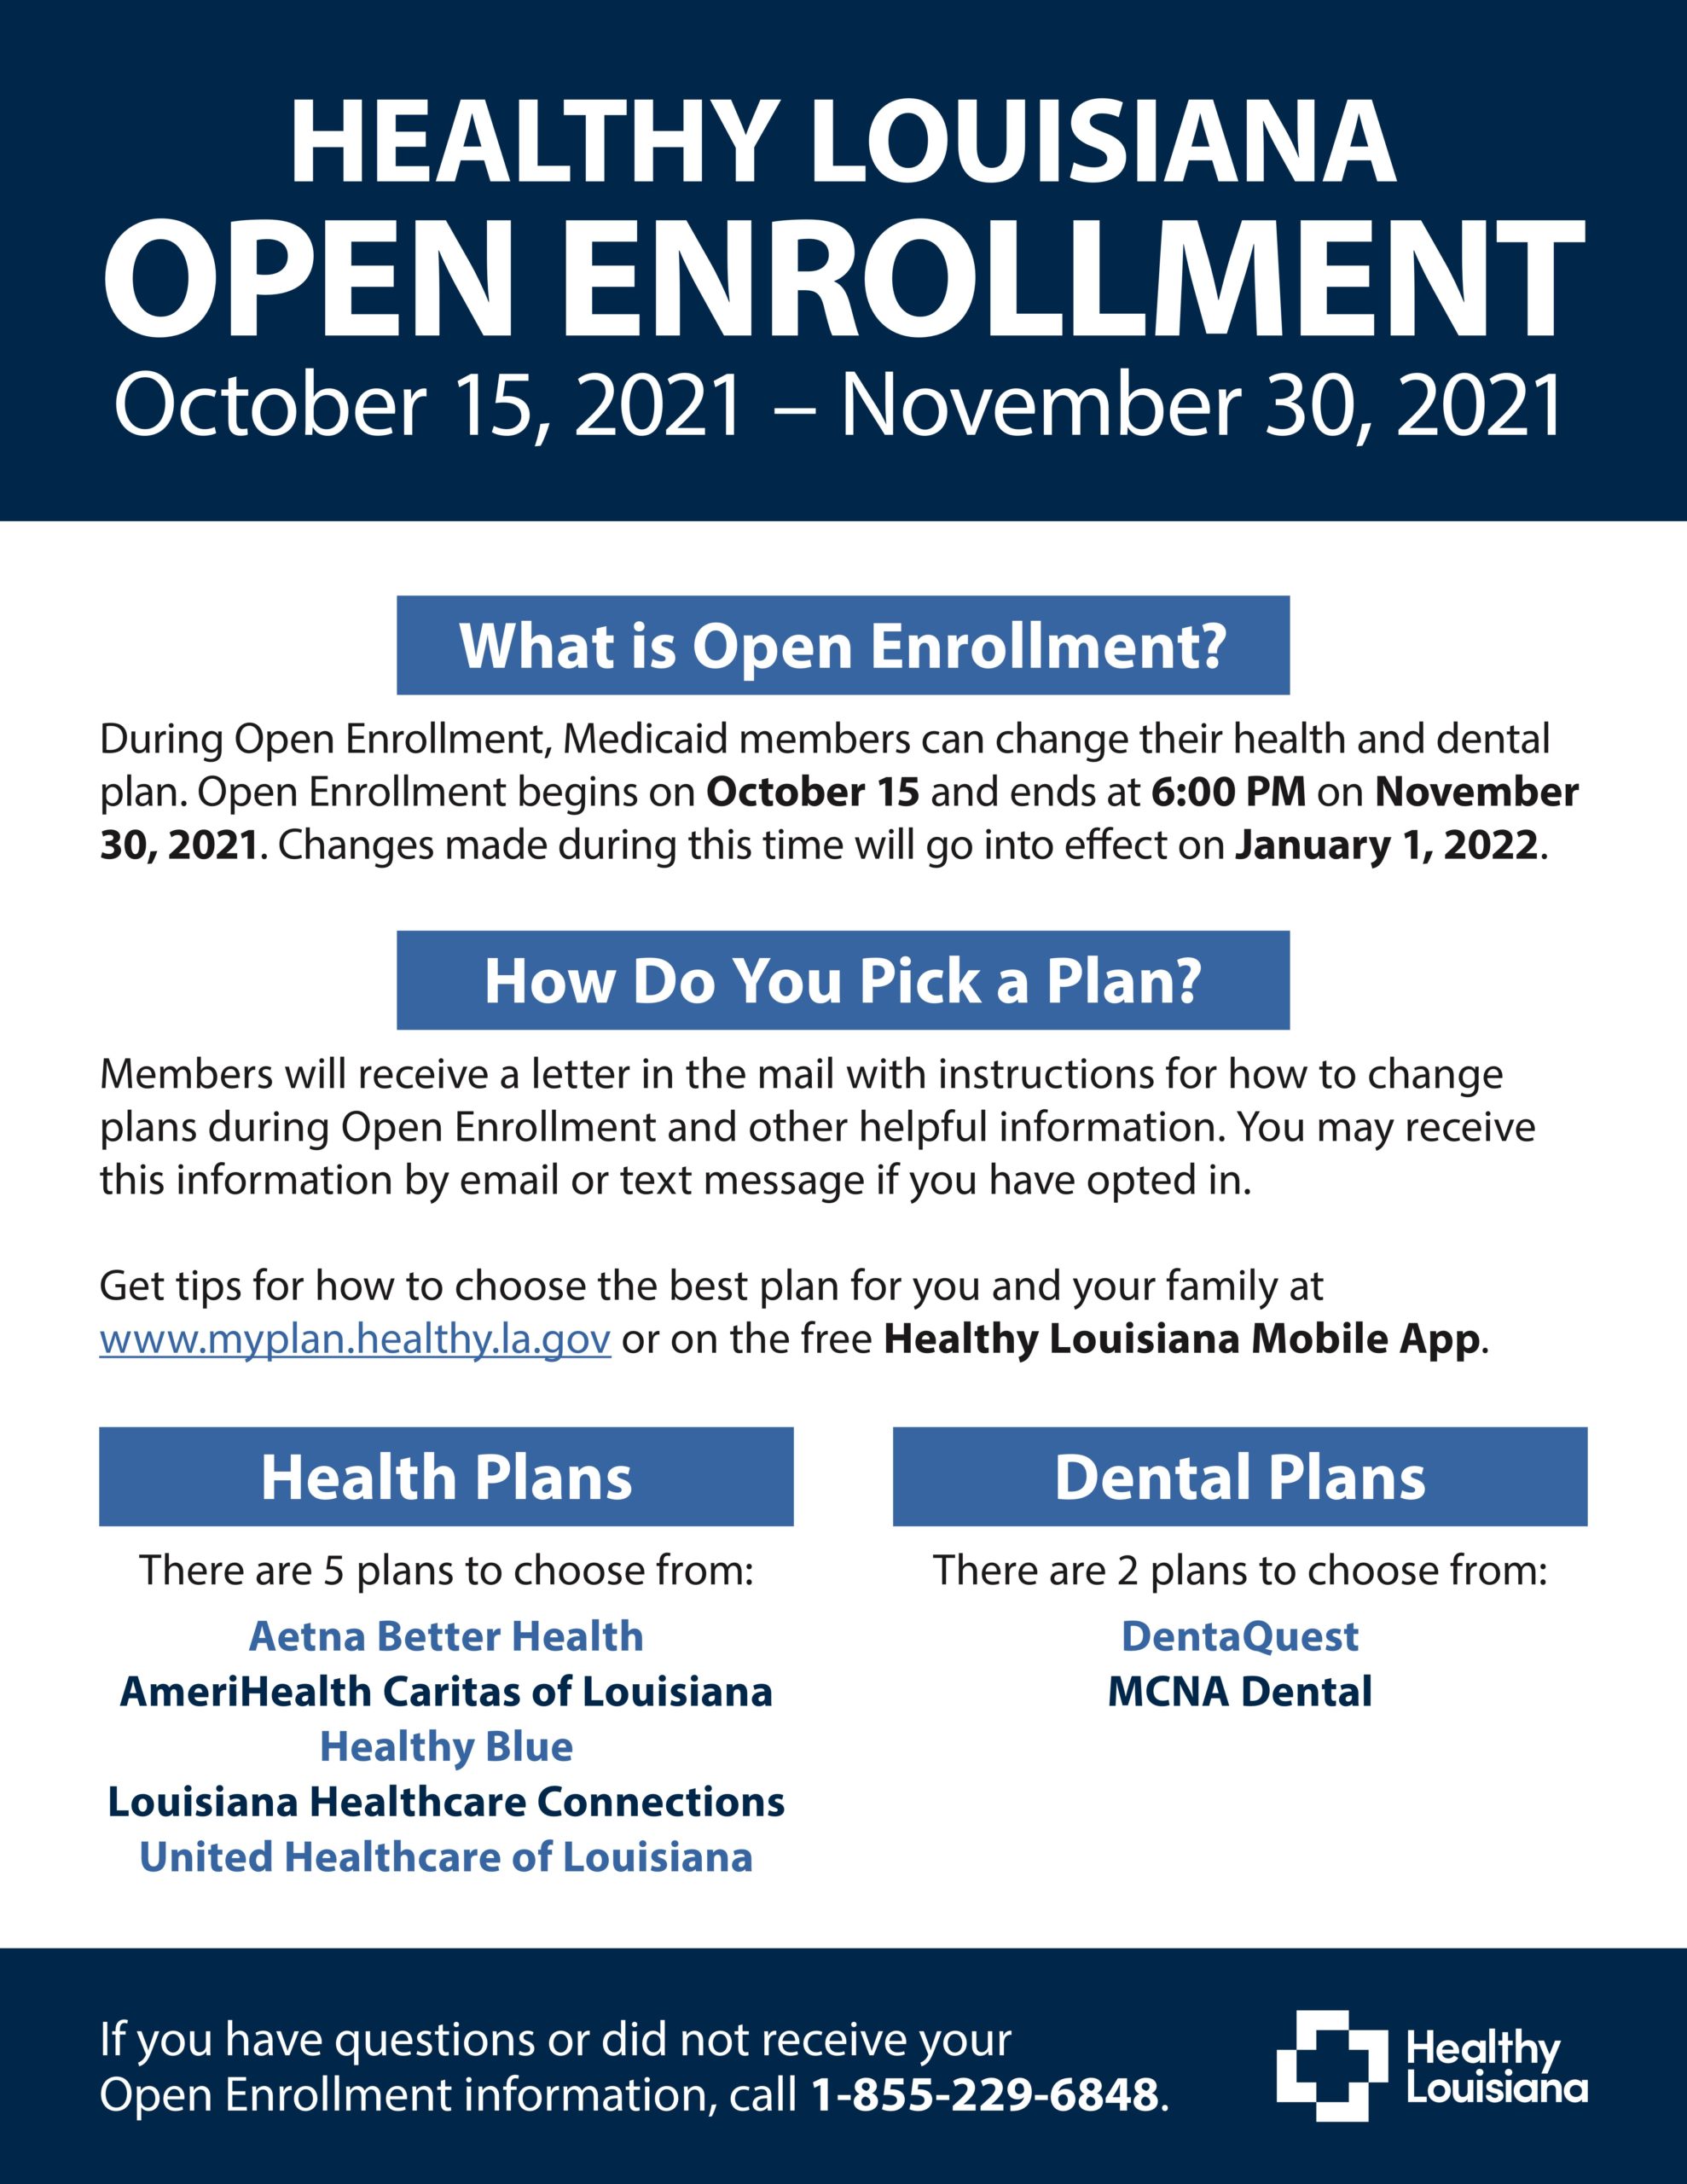 HEALTHY LOUISIANA OPEN ENROLLMENT October 15, 2021 – November 30, 2021 What is Open Enrollment? During Open Enrollment, Medicaid members can change their health and dental plan. Open Enrollment begins on October 15 and ends at 6:00 PM on November 30, 2021. Changes made during this time will go into effect on January 1, 2022. How Do You Pick a Plan? Members will receive a letter in the mail with instructions for how to change plans during Open Enrollment and other helpful information. You may receive this information by email or text message if you have opted in. Get tips for how to choose the best plan for you and your family at www.myplan.healthy.la.gov or on the free Healthy Louisiana Mobile App. Health Plans There are 5 plans to choose from: Aetna Better Health AmeriHealth Caritas of Louisiana Healthy Blue Louisiana Healthcare Connections United Healthcare of Louisiana Dental Plans There are 2 plans to choose from: DentaQuest MCNA Dental If you have questions or did not receive your Open Enrollment information, call 1-855-229-6848.